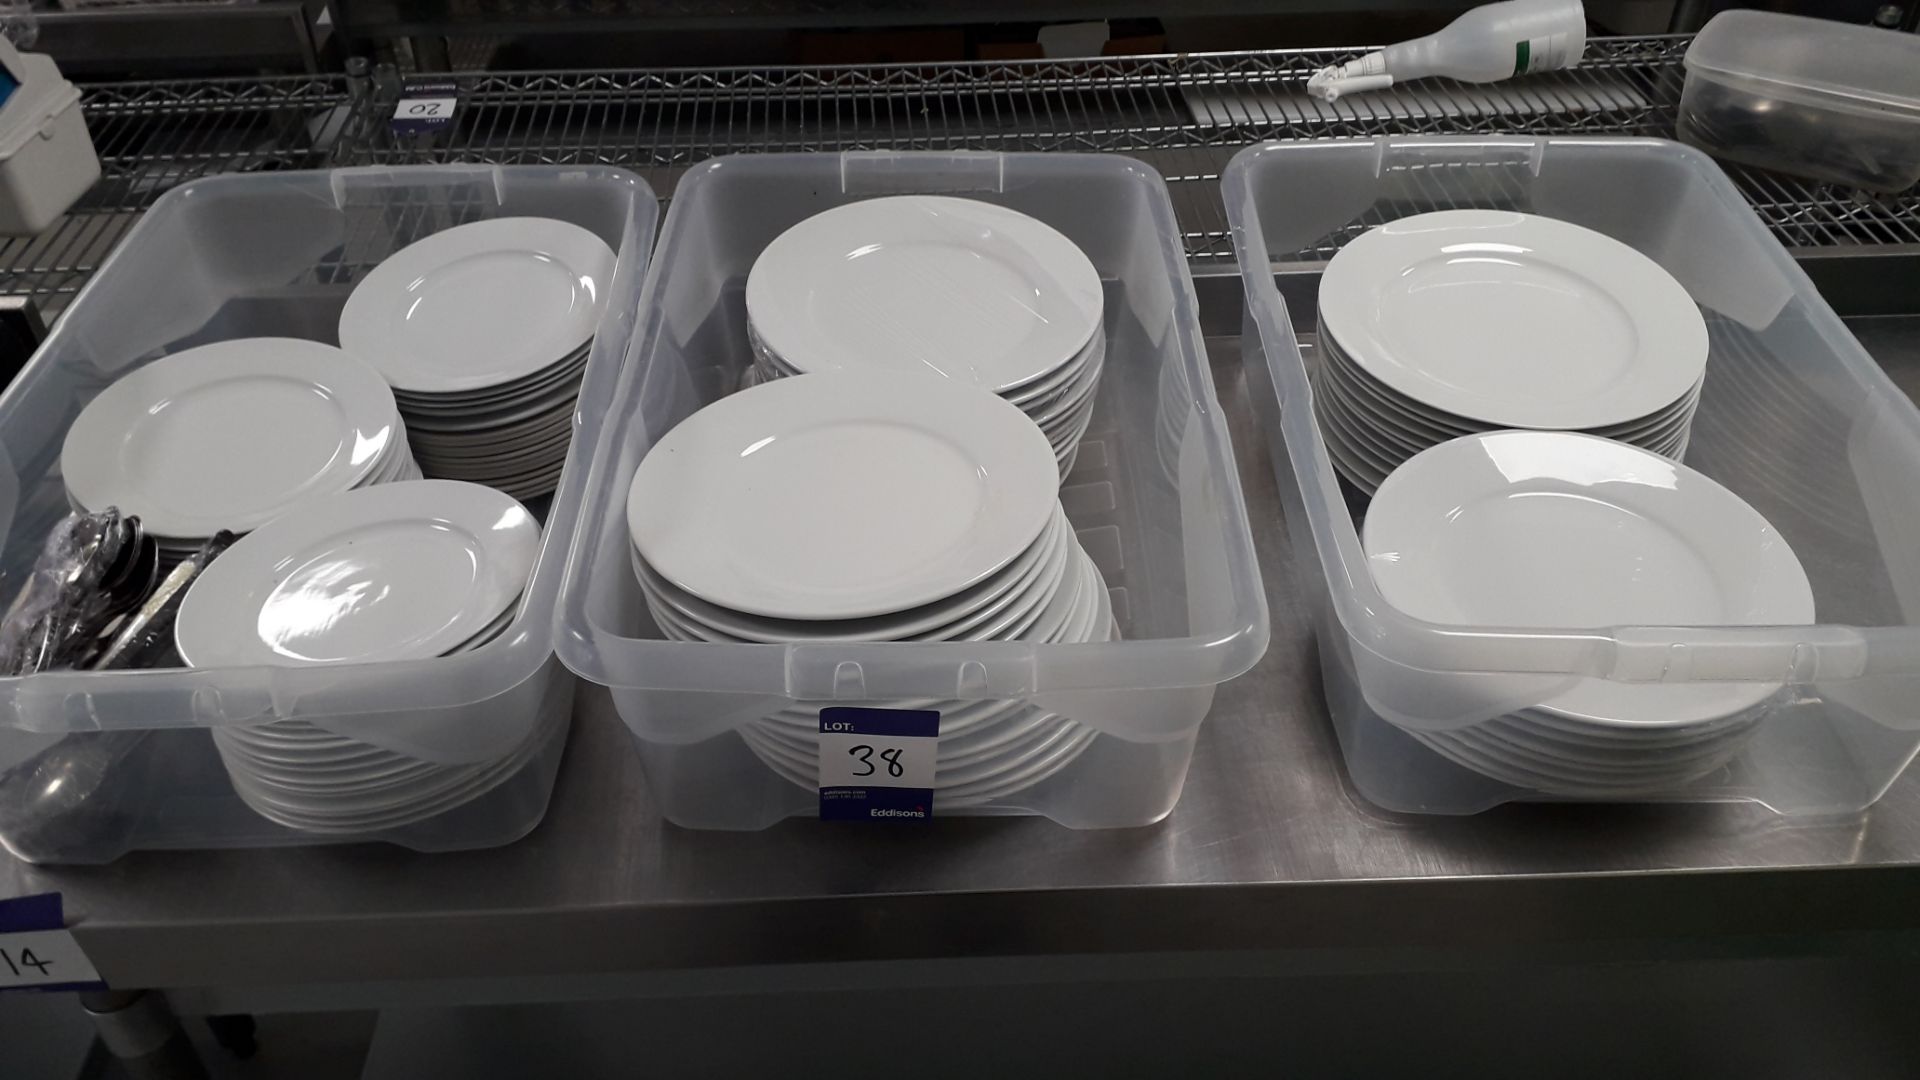 3 x Containers containing various White Crockery. Located at The Great Little Catering Company